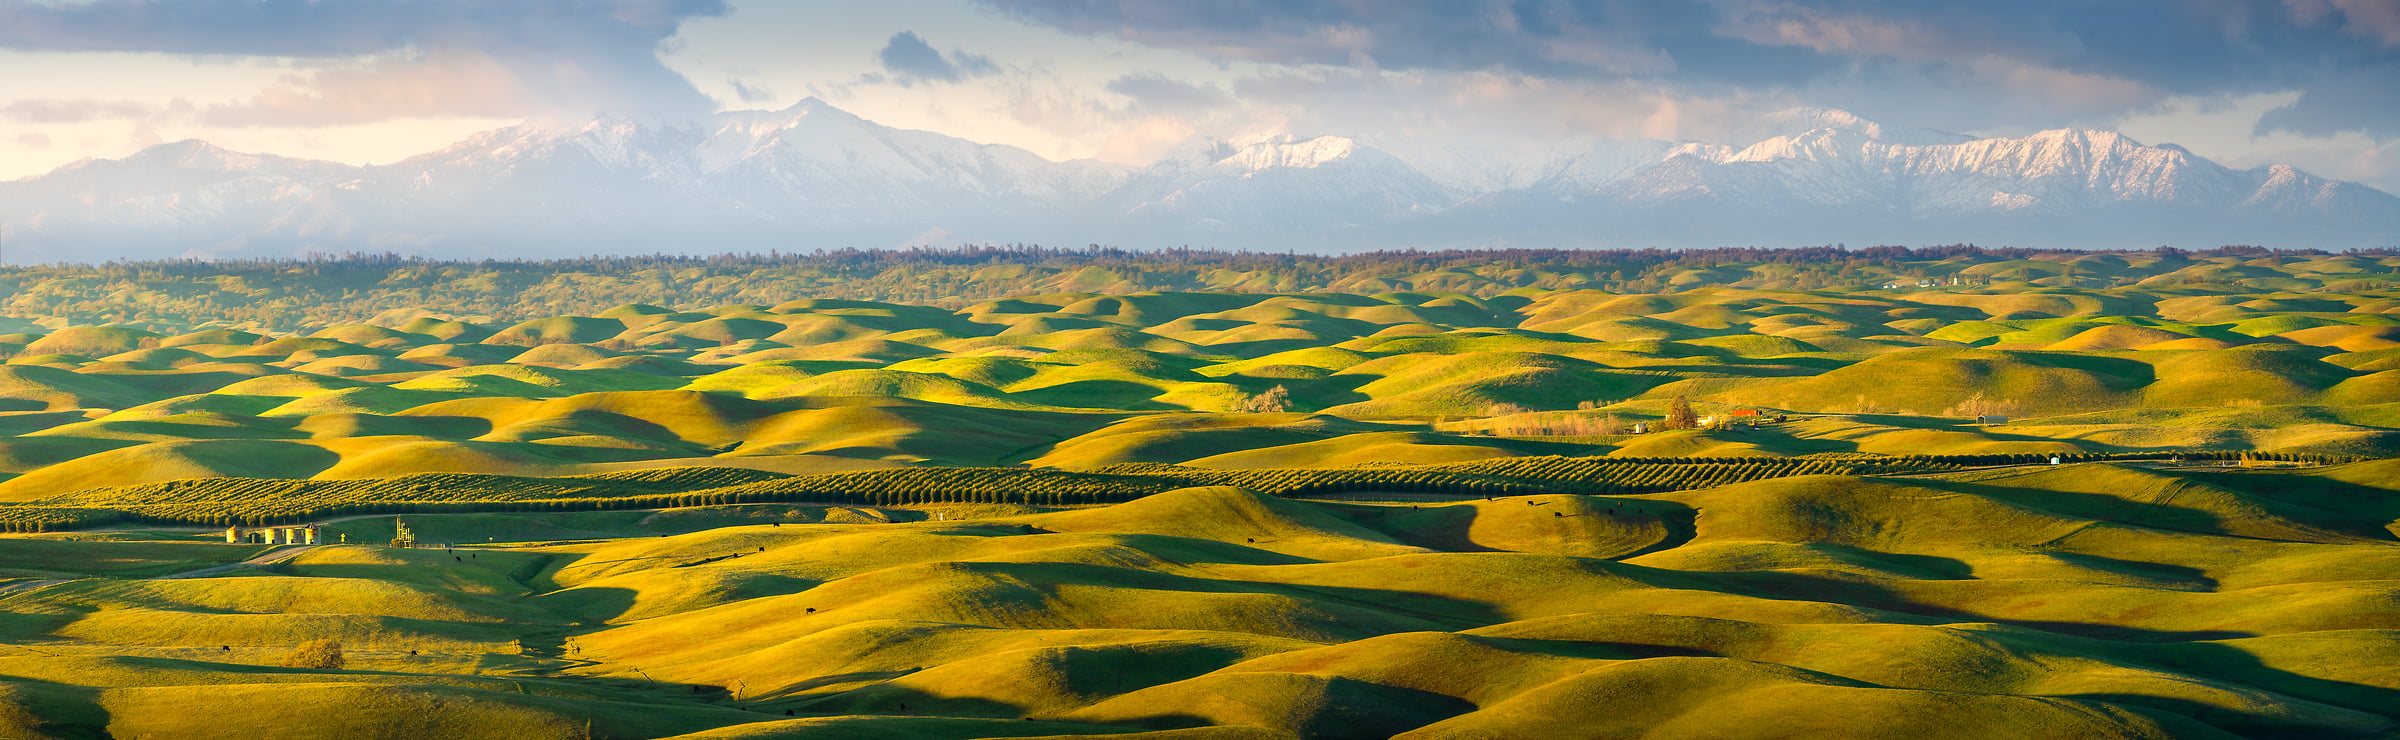 107 megapixels! A very high resolution, large-format VAST photo print of peaceful rolling hills with mountains in the background; landscape photograph created by Jeff Lewis in California.